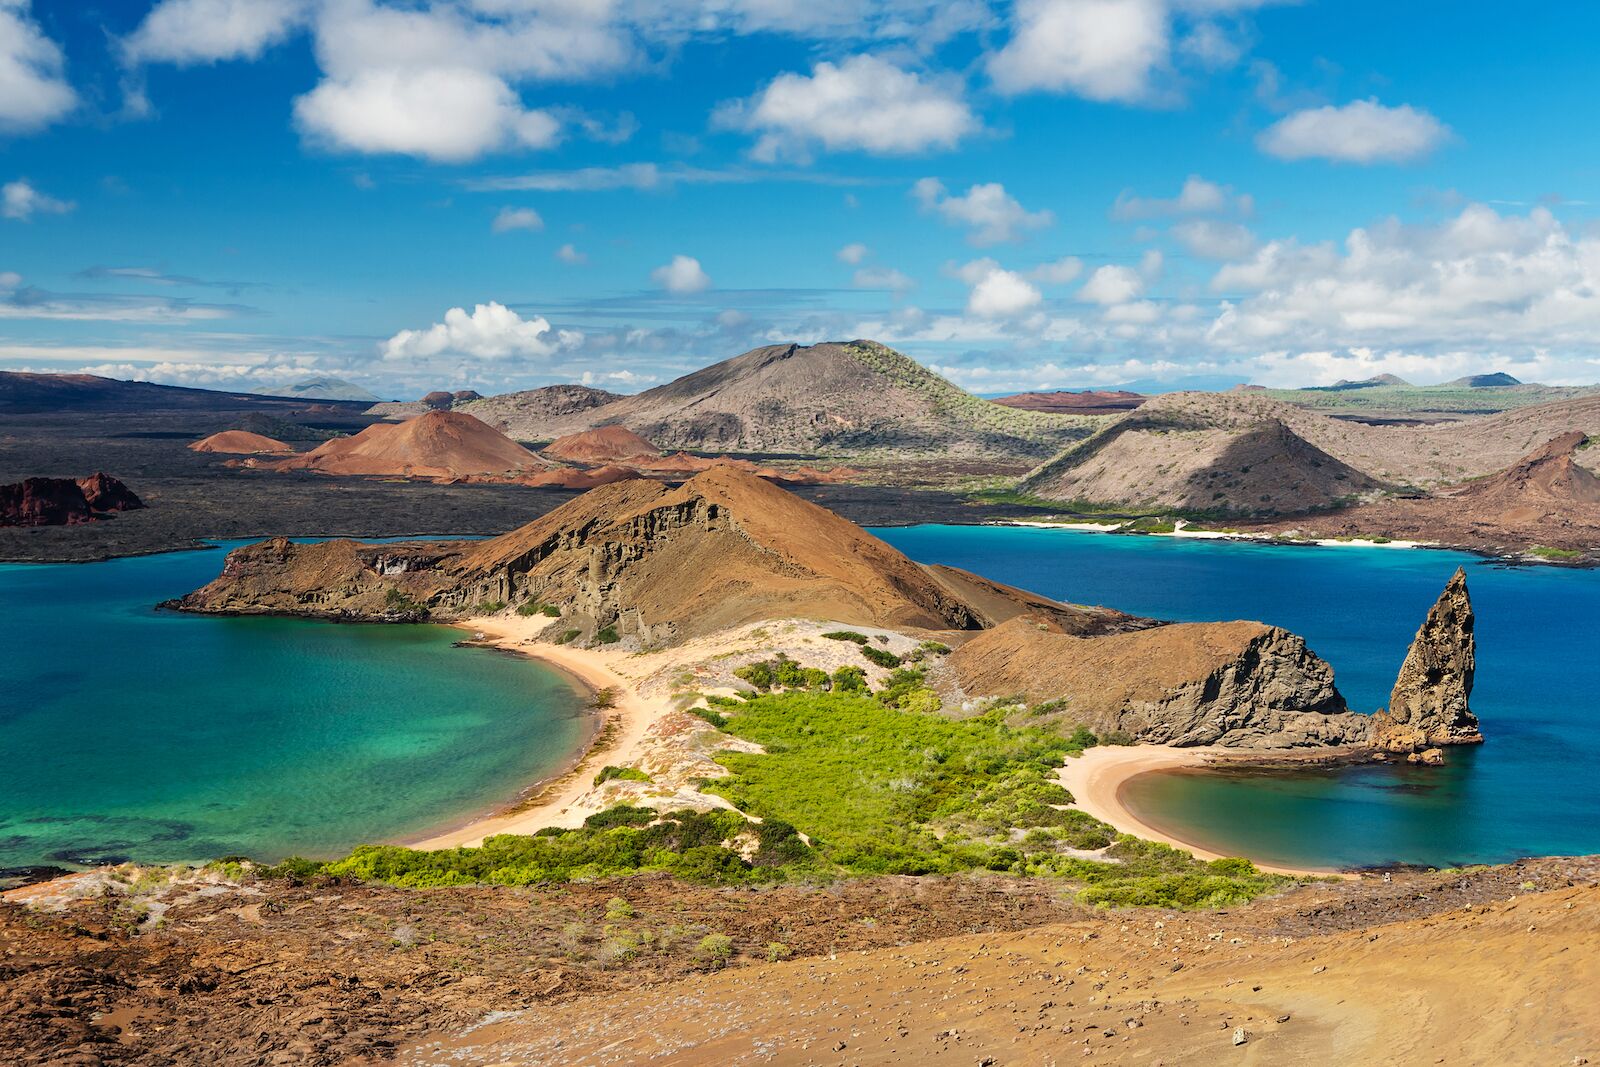 Volcanic landscape in the Galapagos